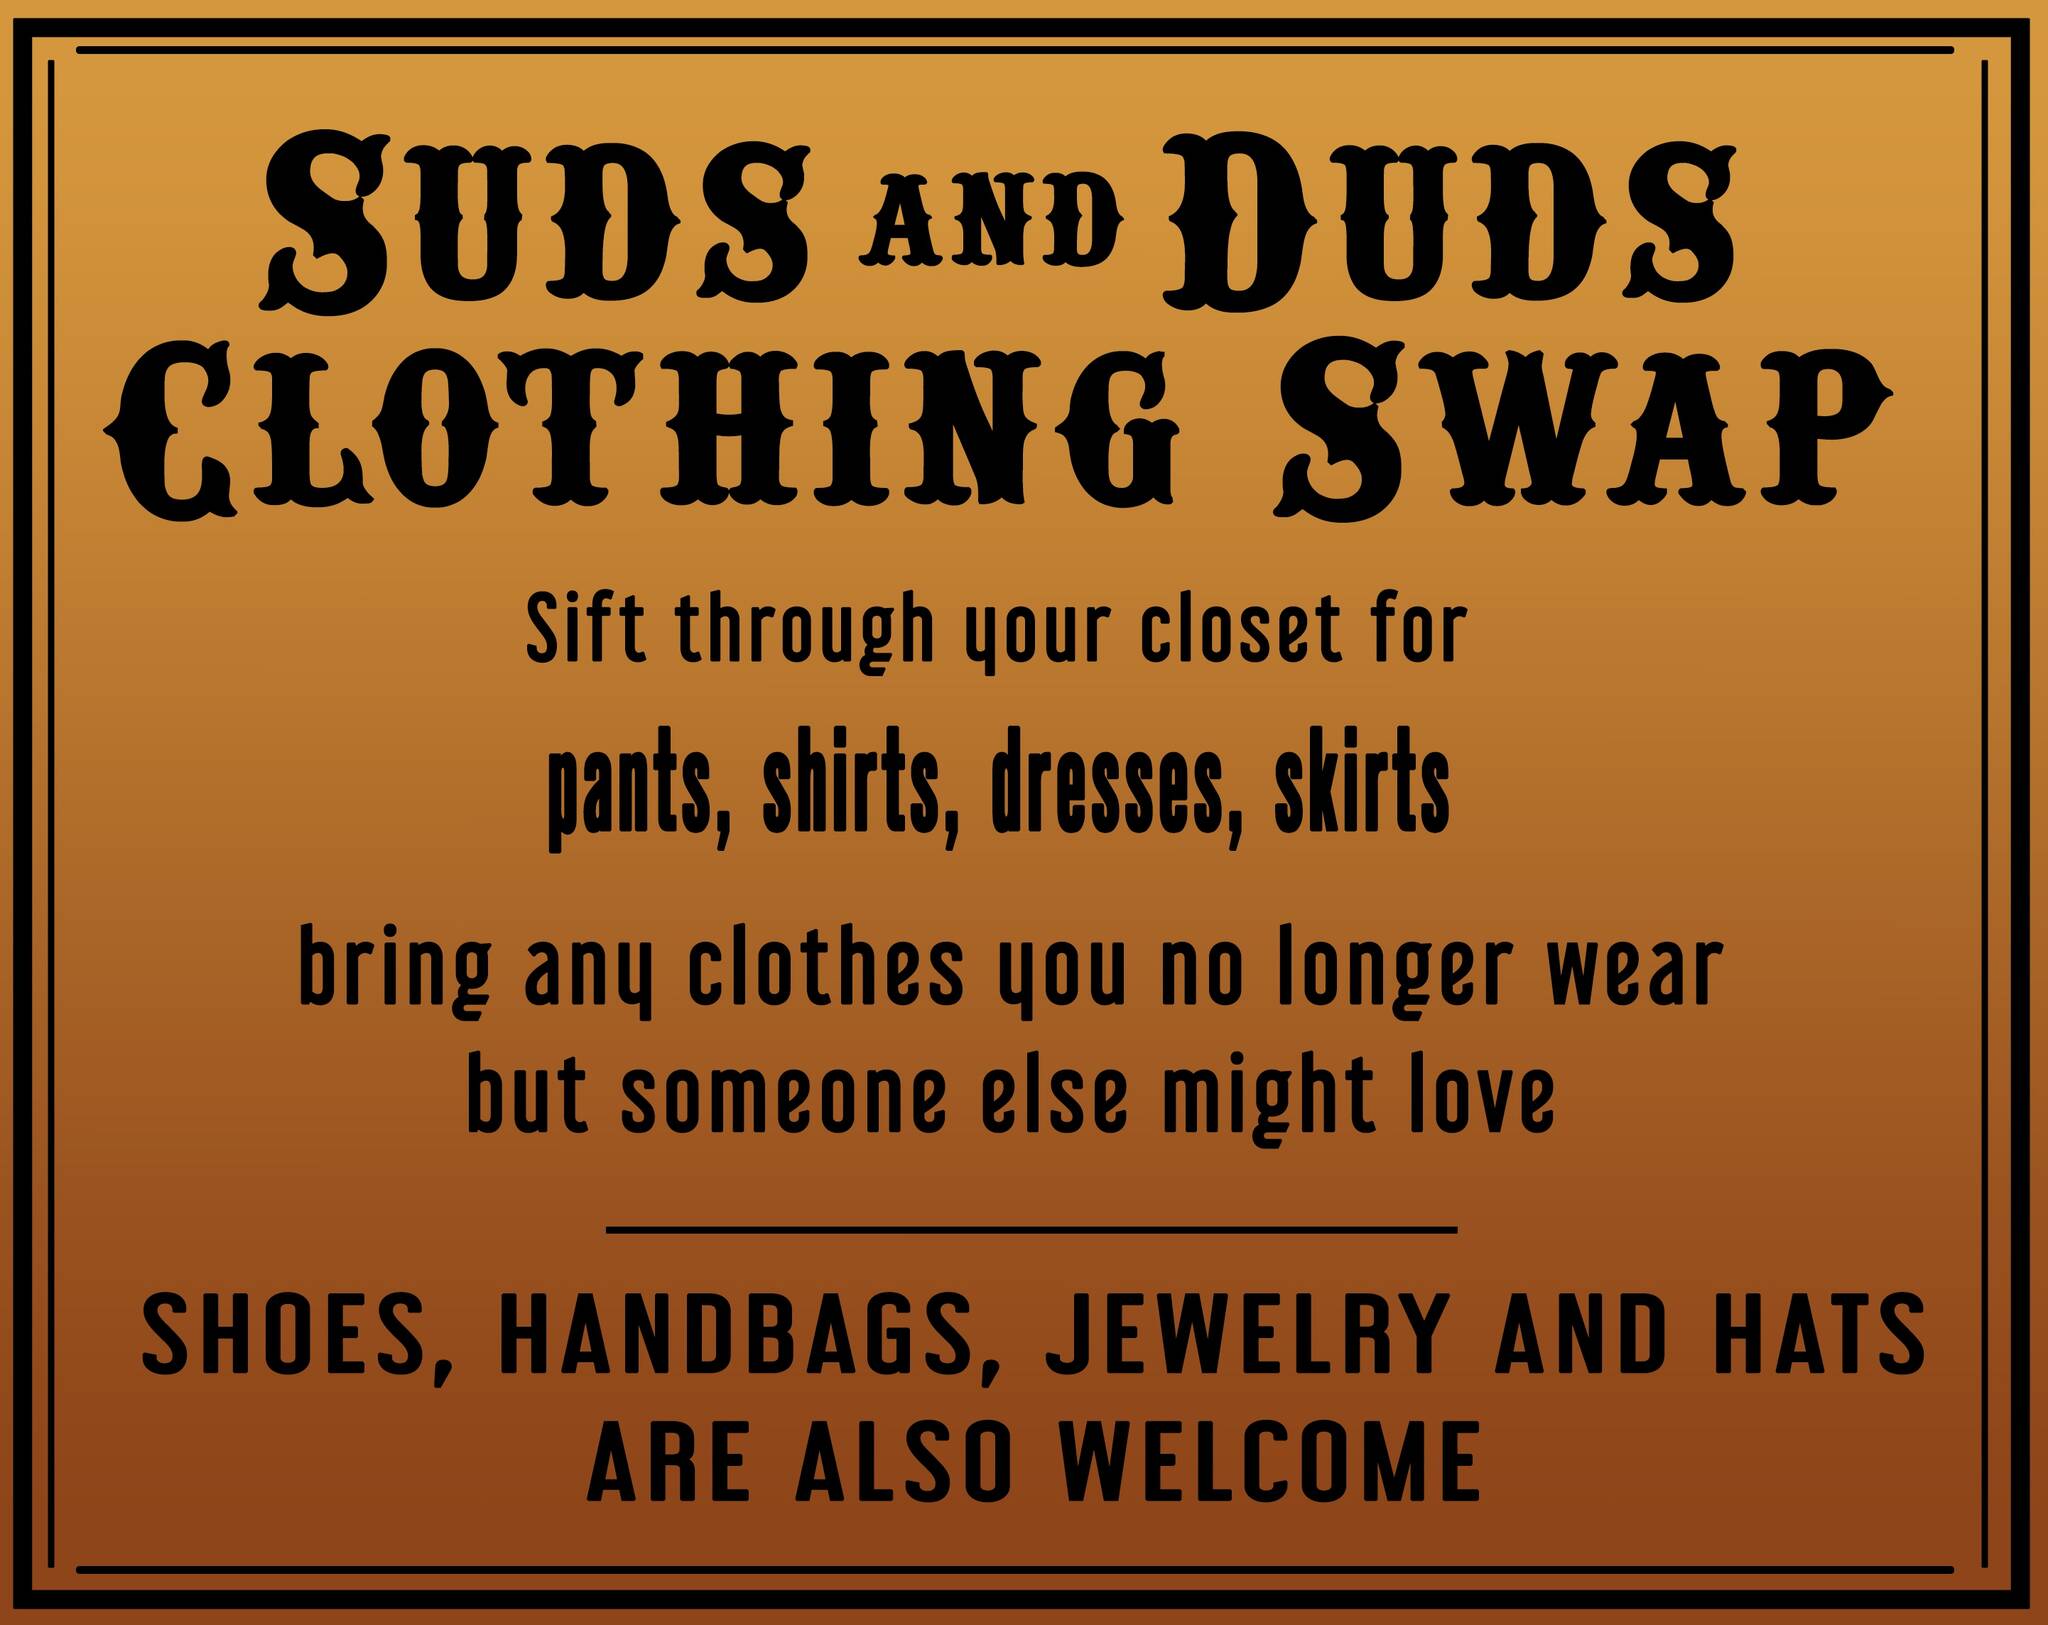 Suds and Duds - Women's Clothing Swap